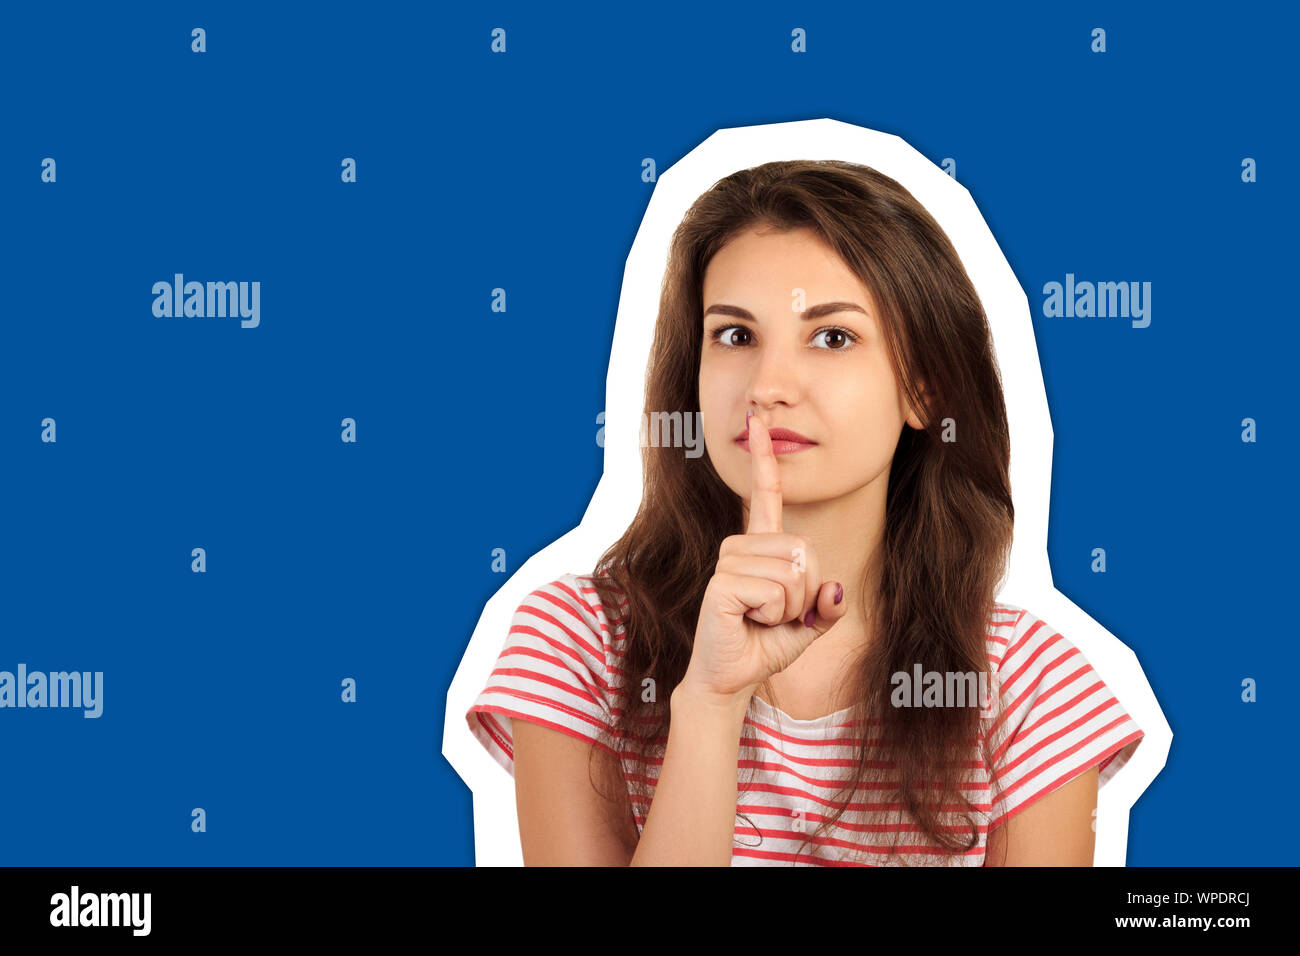 Young woman holding a finger on her lips - silent gesture. emotional girl Magazine collage style with trendy color background. Stock Photo